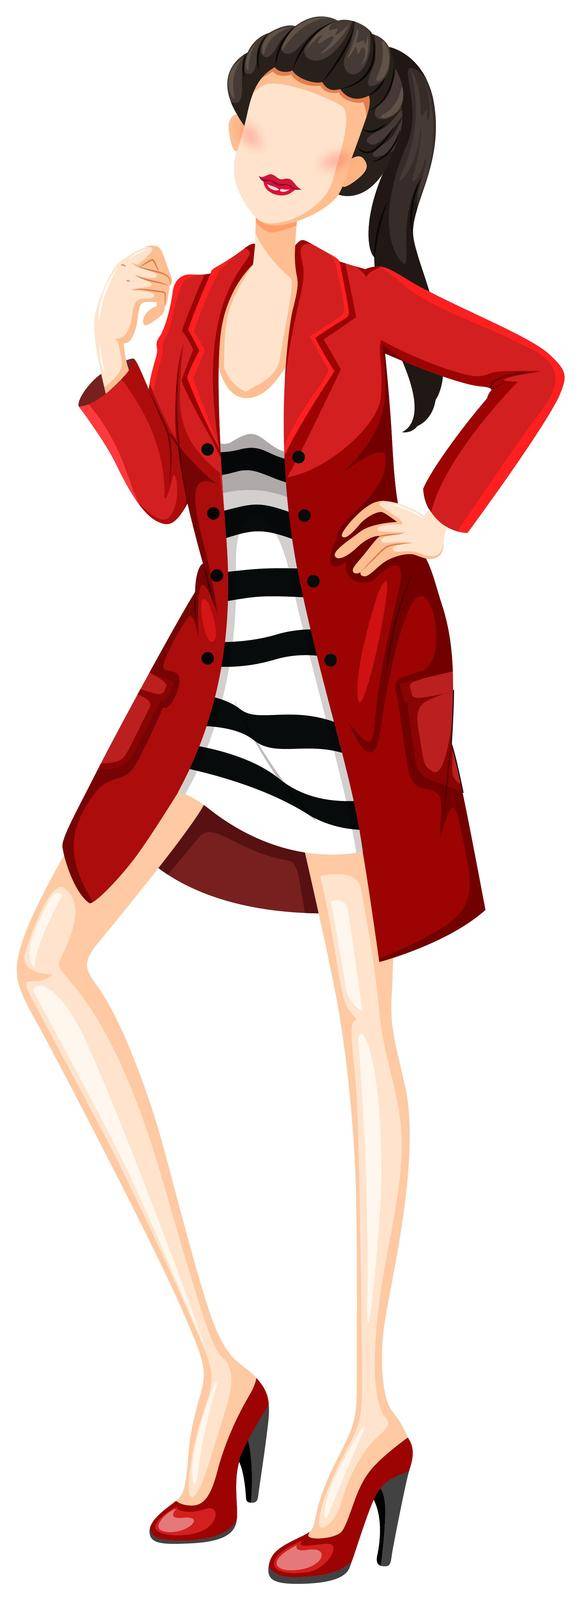 Sketch of a woman in black and white dress and red overcoat